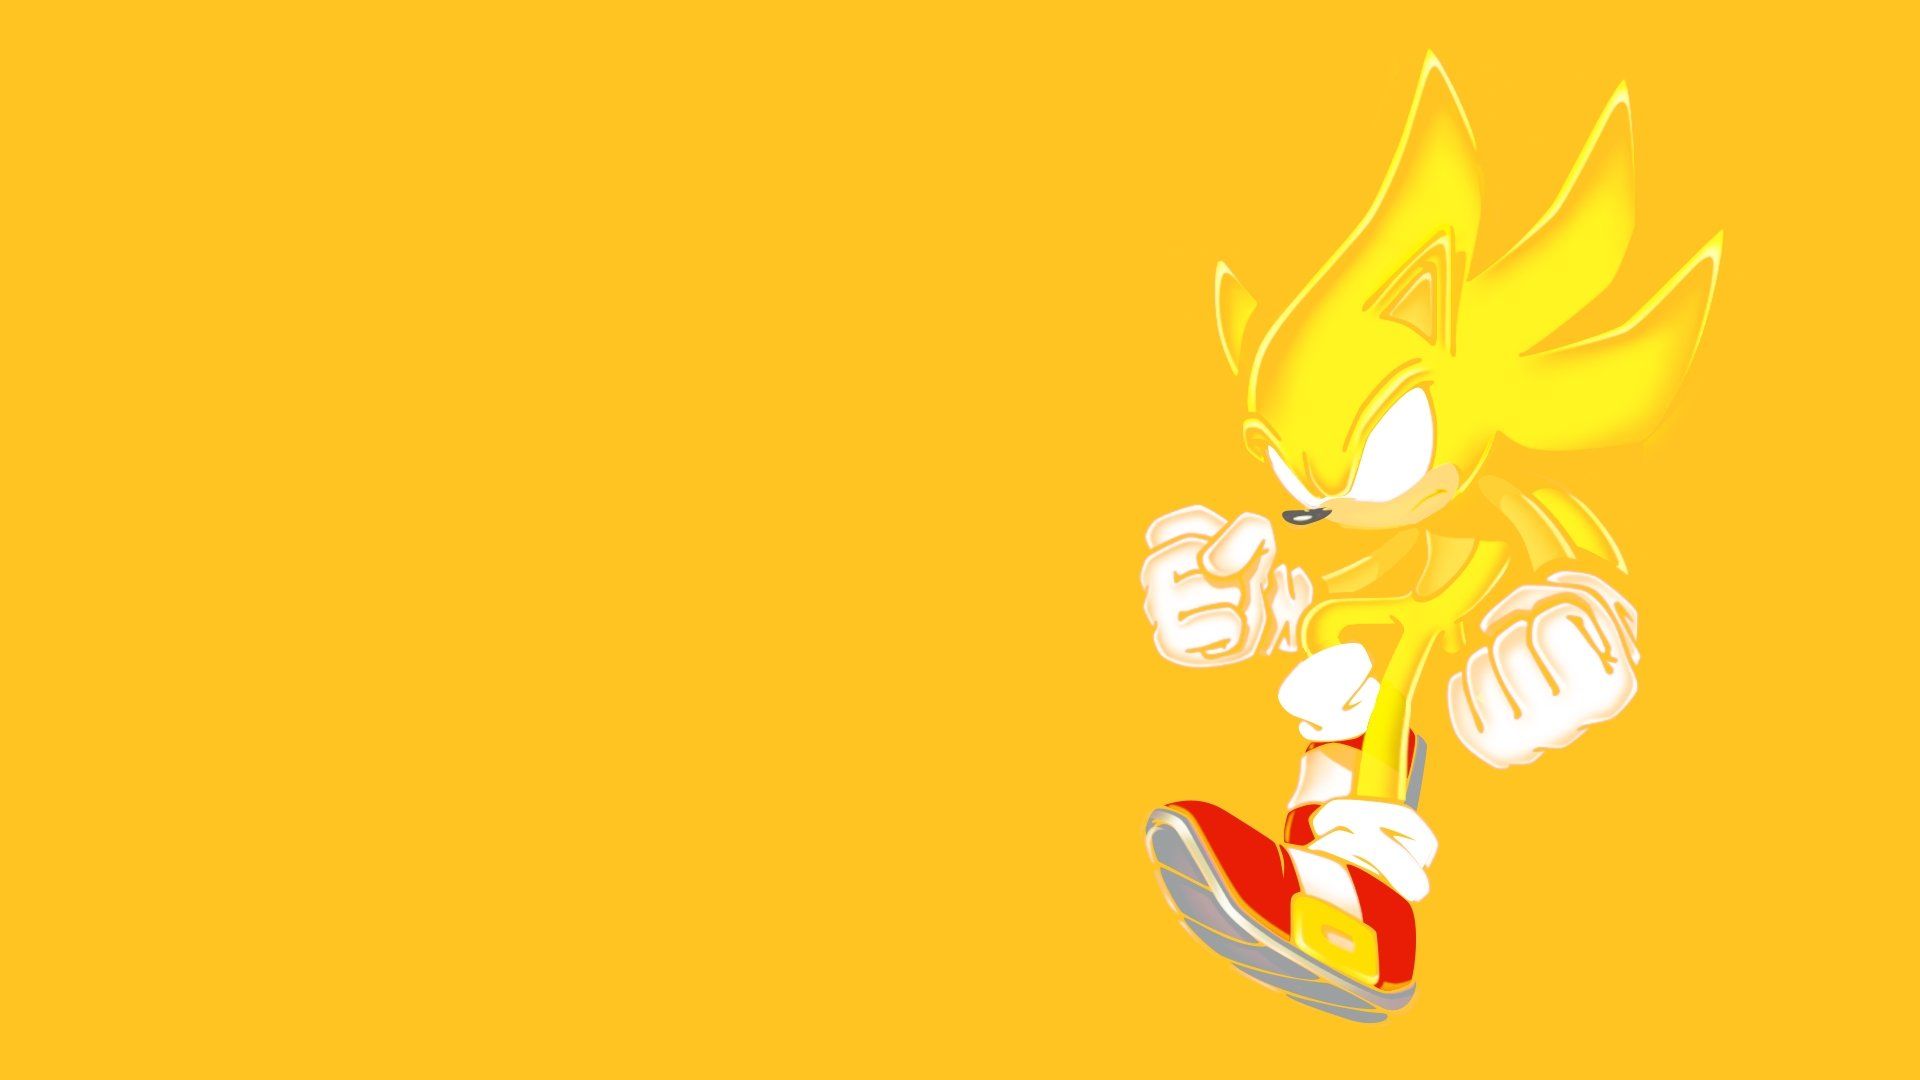 Free download Sonic Sonic the Hedgehog Yellow wallpaper background [1920x1080] for your Desktop, Mobile & Tablet. Explore Sonic The Hedgehog Background. Shadow The Hedgehog Wallpaper HD, Silver The Hedgehog